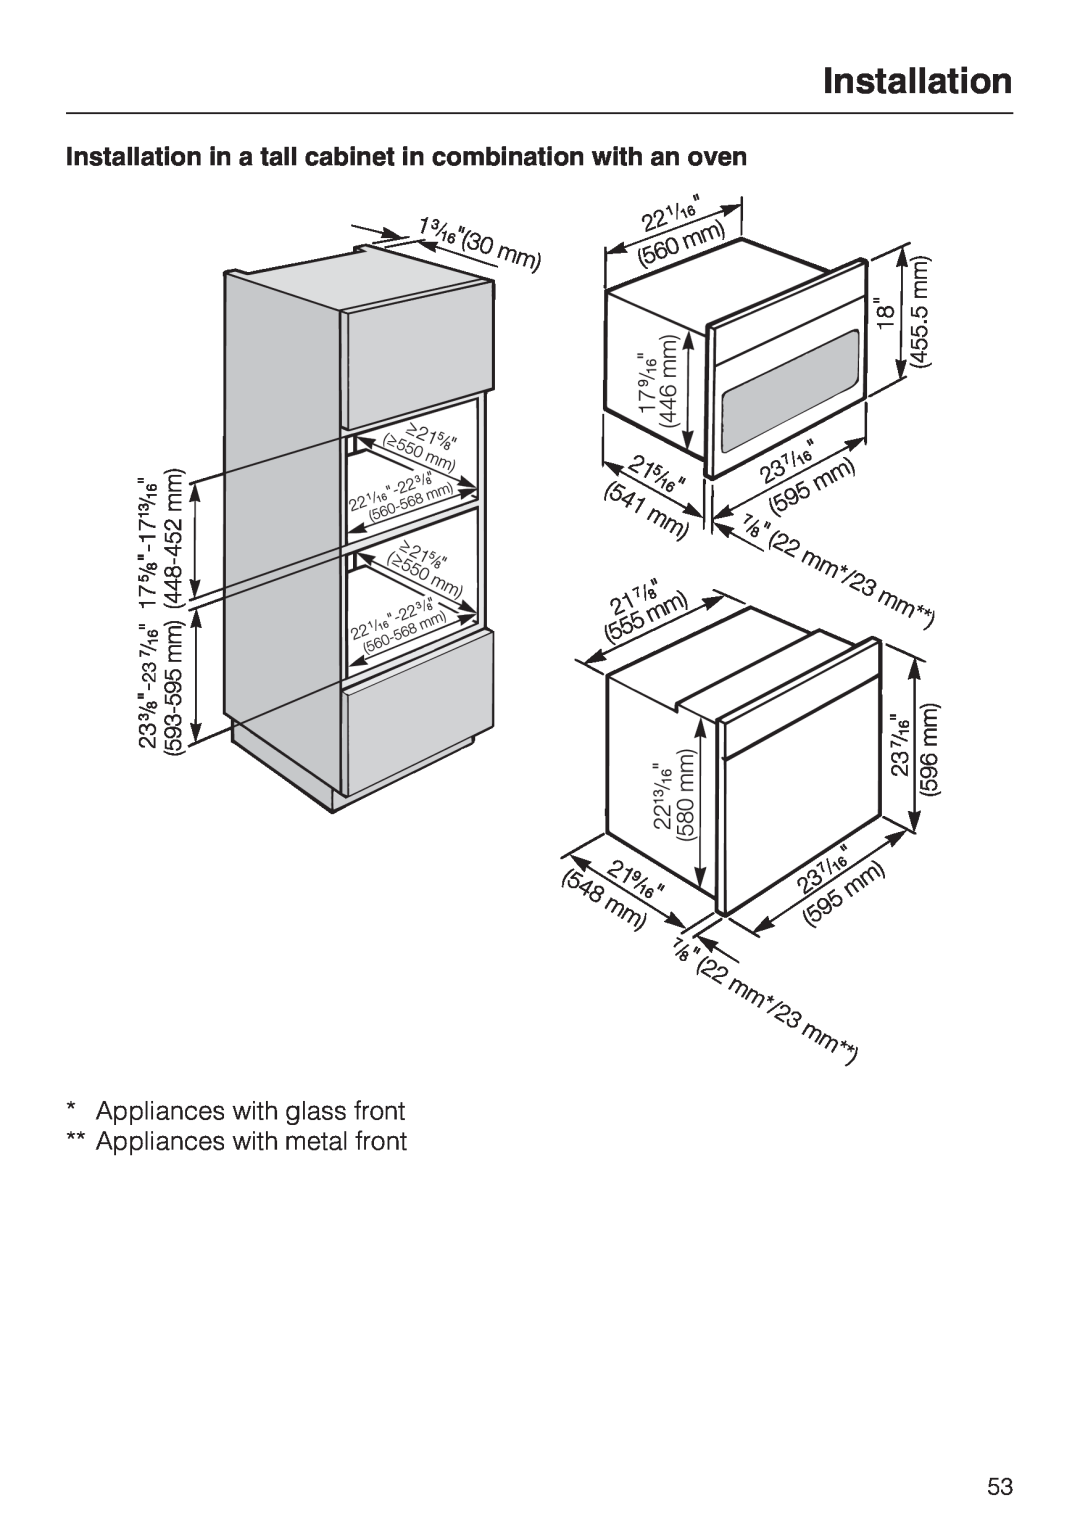 Miele H 4044 BM installation instructions Installation in a tall cabinet in combination with an oven 